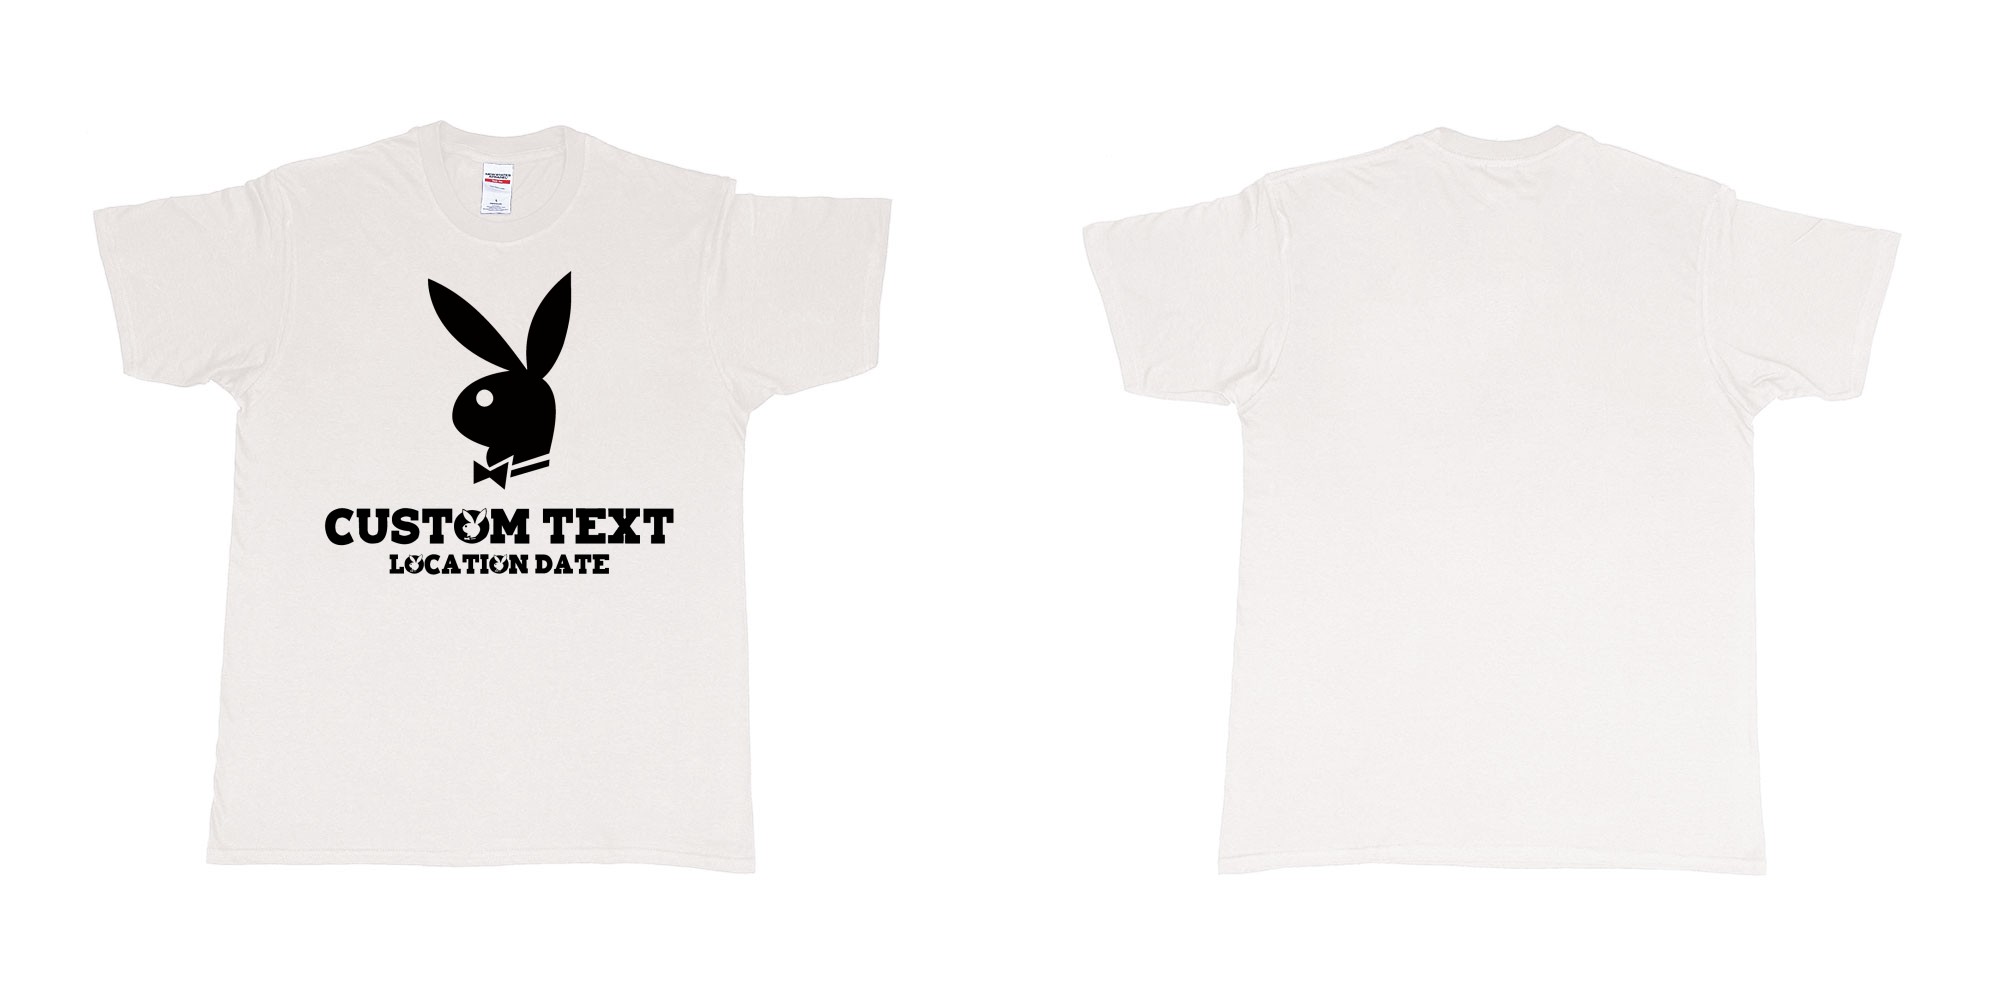 Custom tshirt design playboy playgirl custom text tshirt in fabric color white choice your own text made in Bali by The Pirate Way